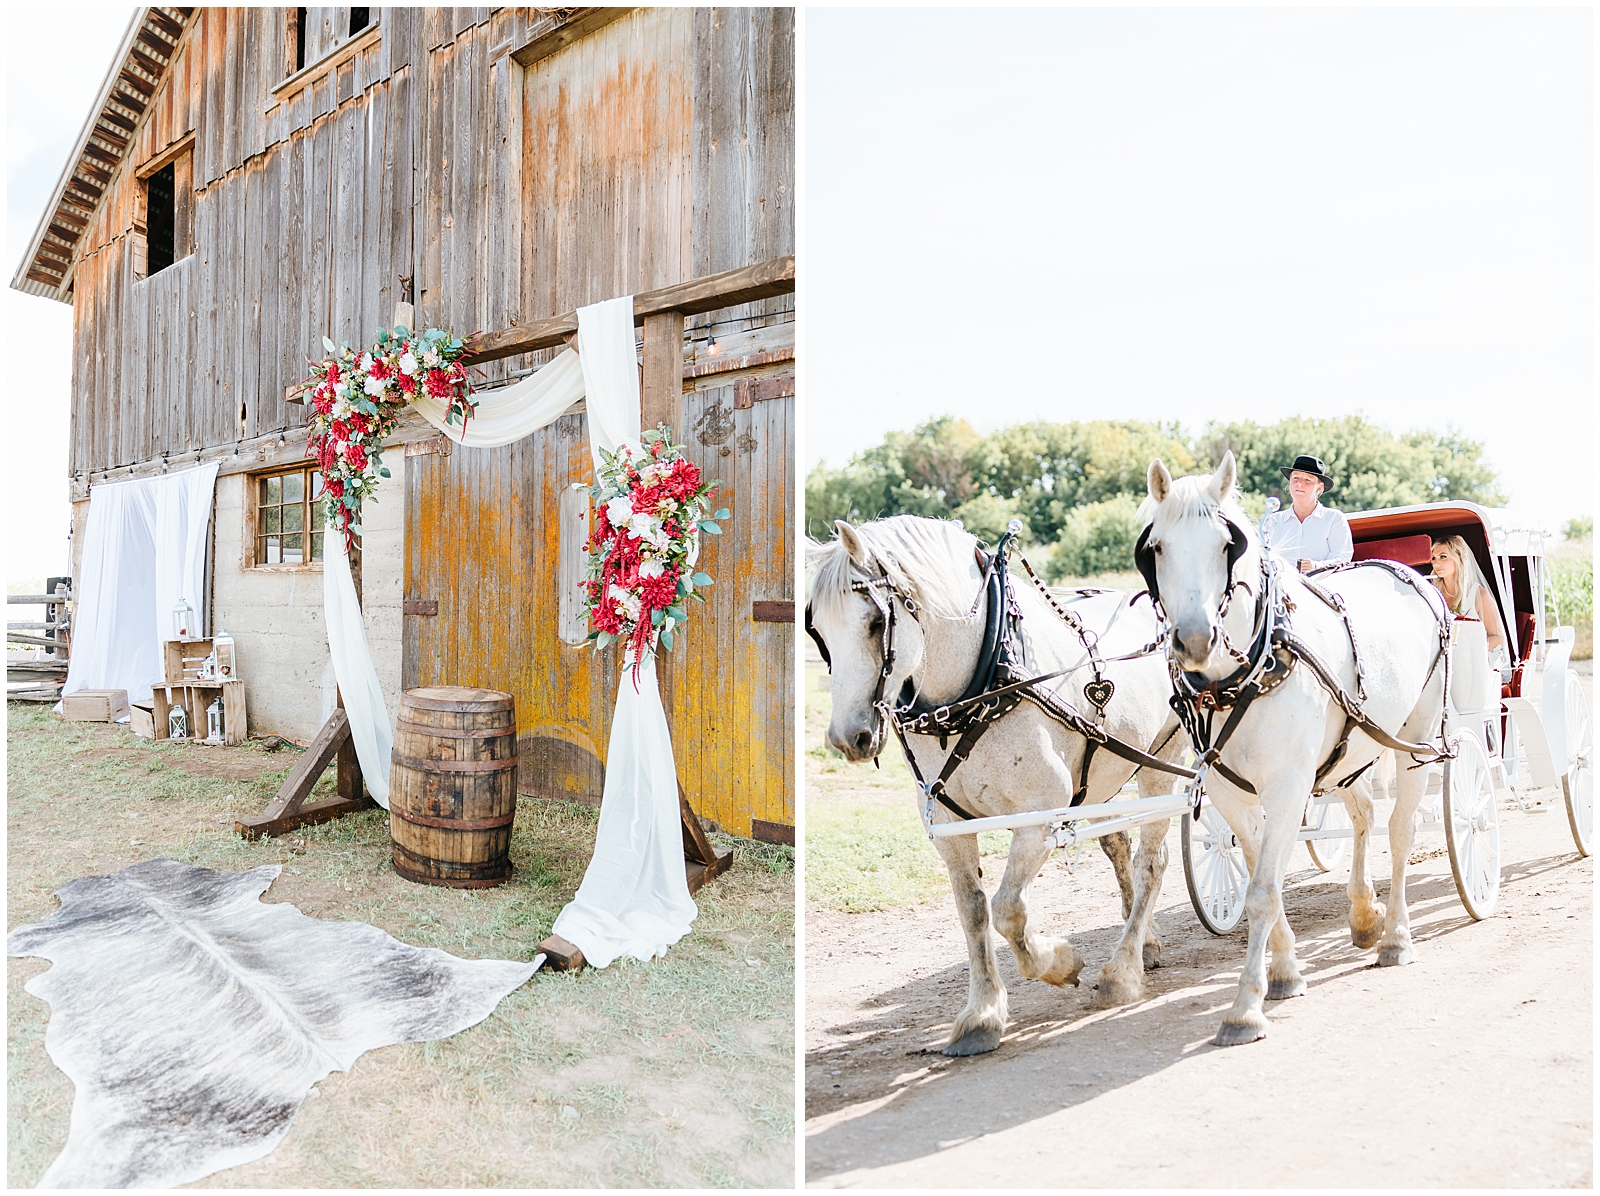 Rustic Barn Wedding with Arbor and Horse Drawn Carriage for the Bride at Private Idaho Ranch Wedding